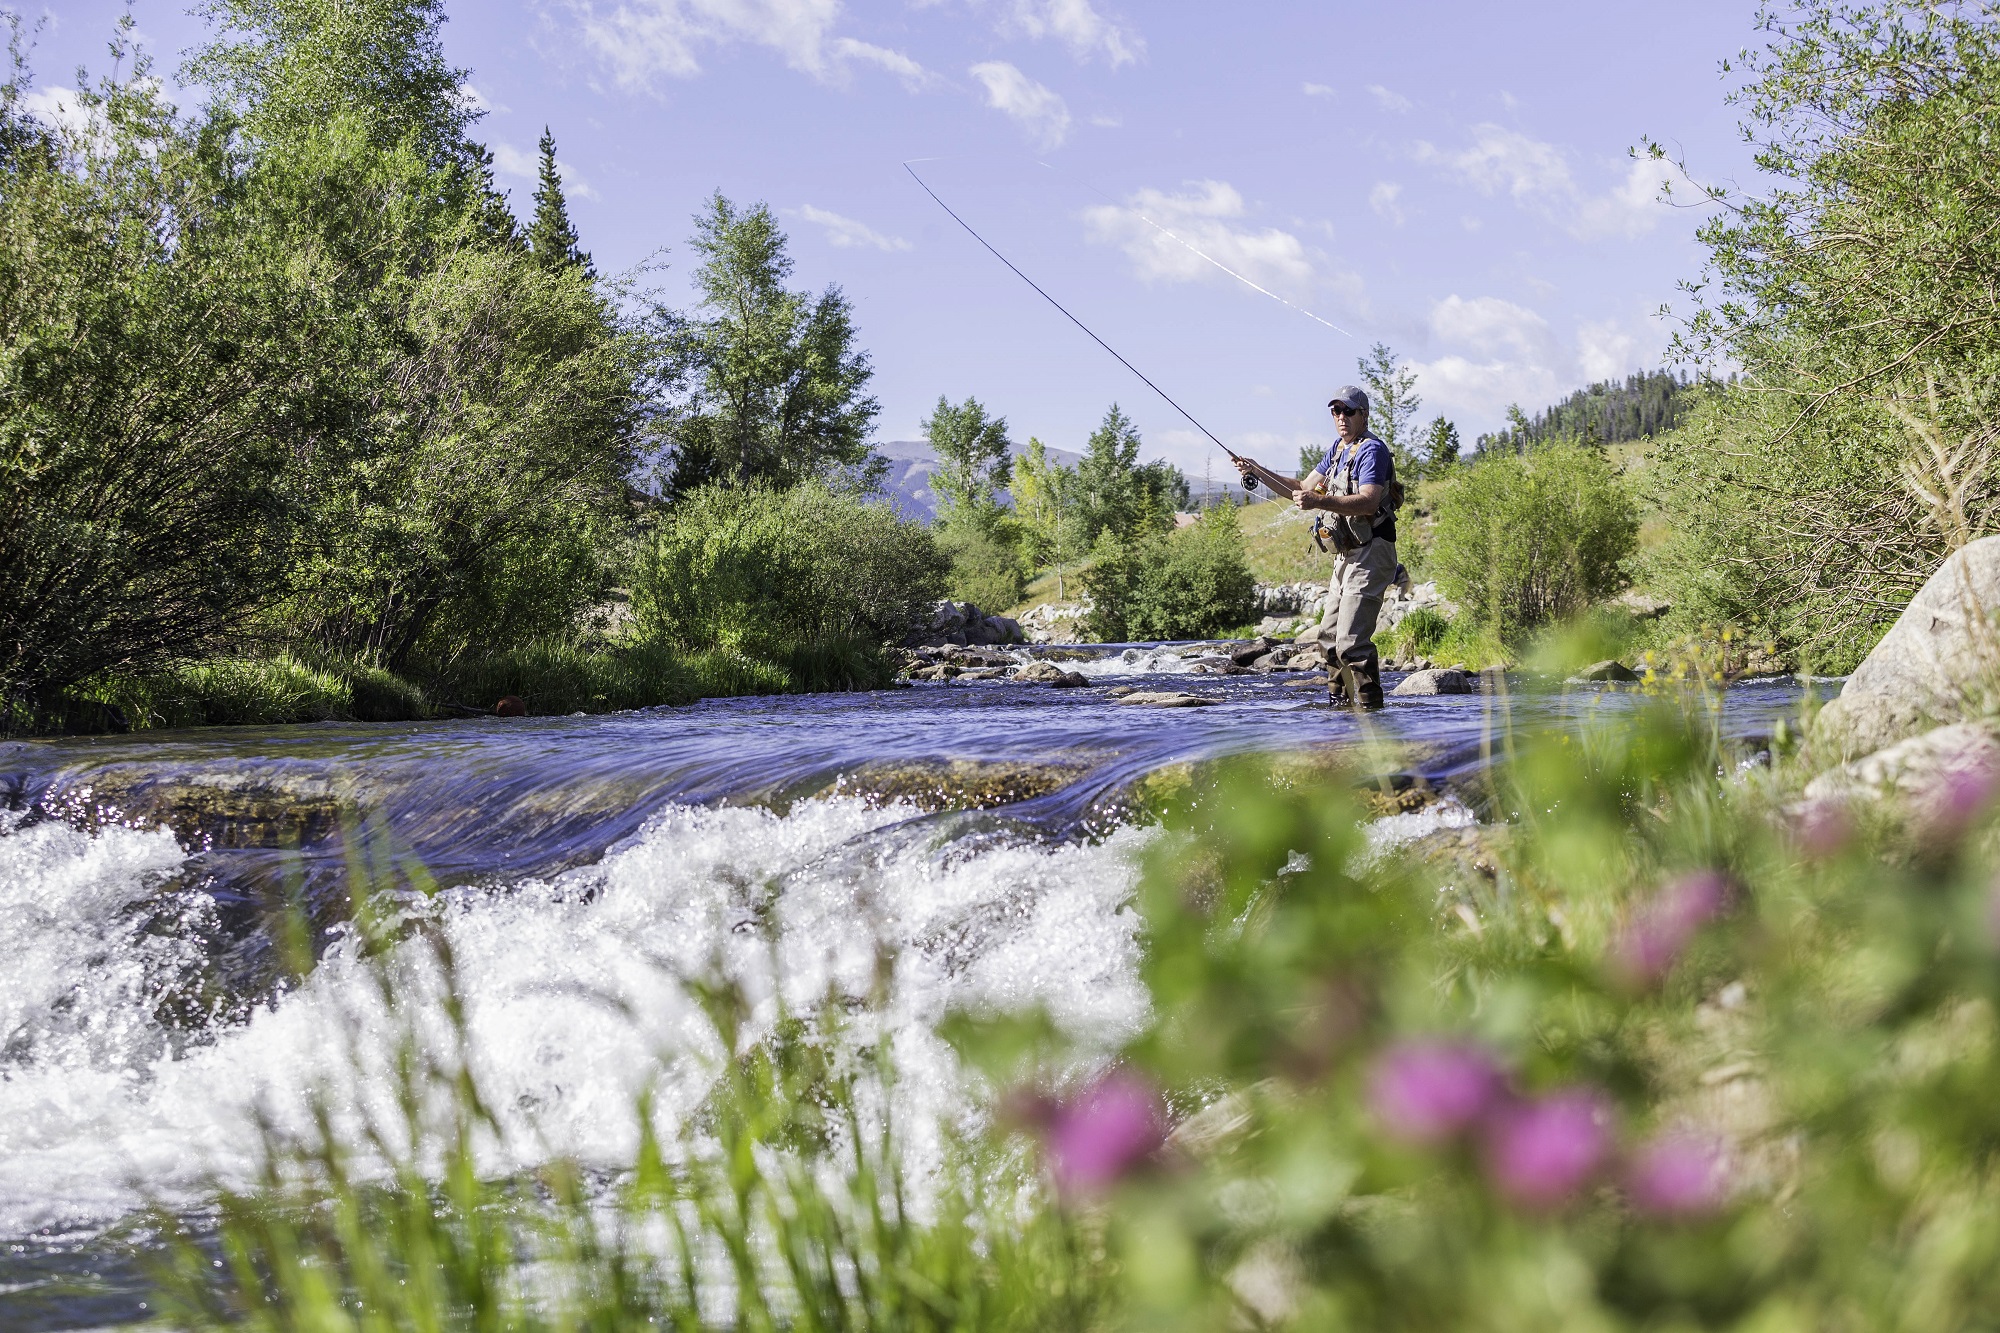 Man fly fishing in the river at Breckenridge